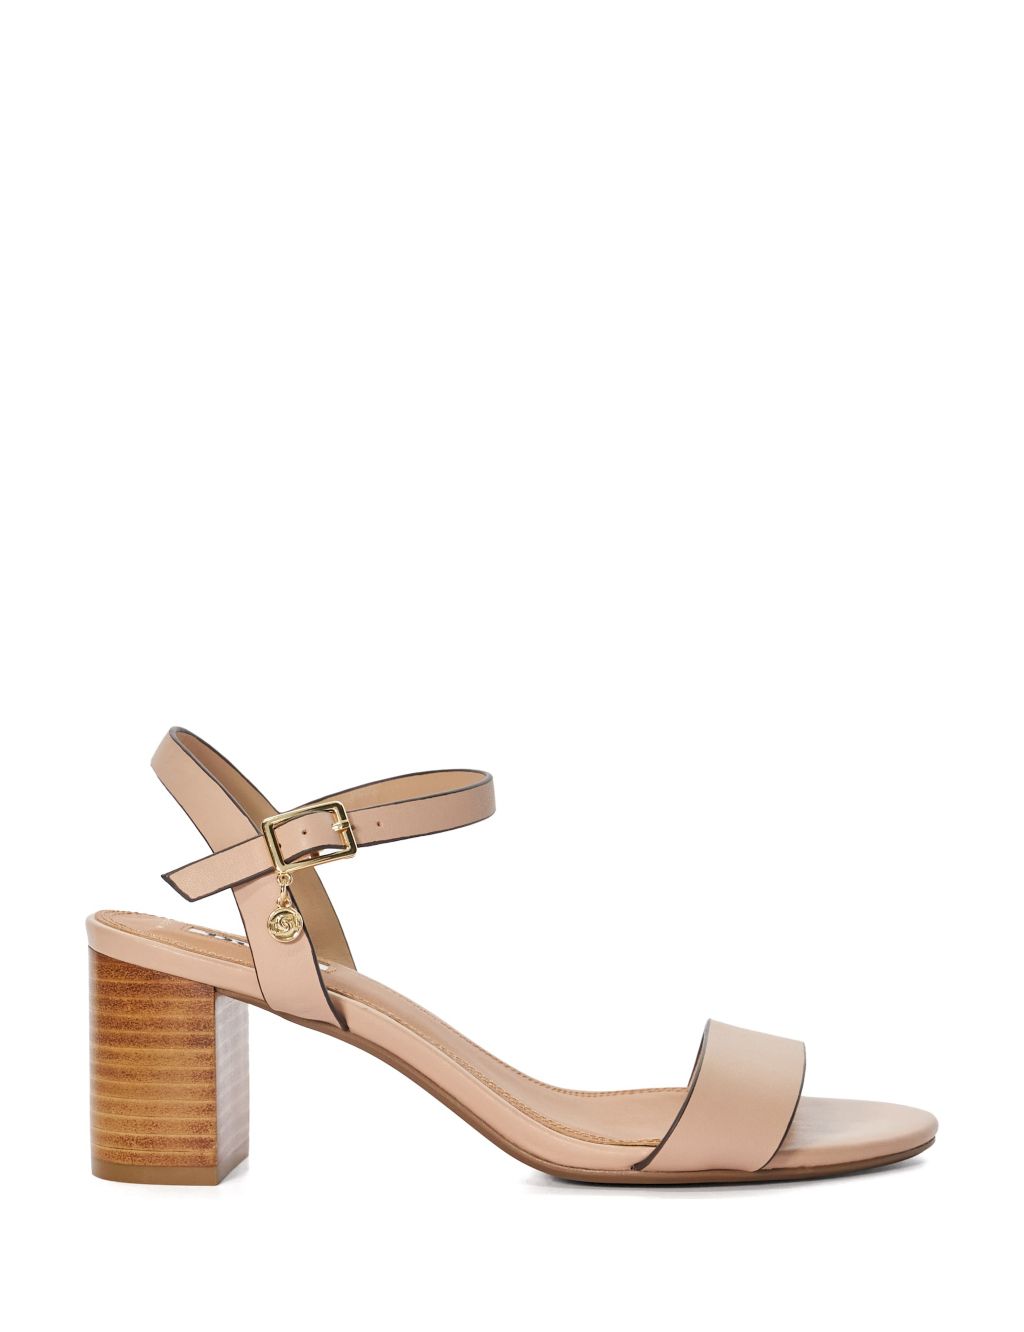 Wide Fit Leather Block Heel Strappy Sandals